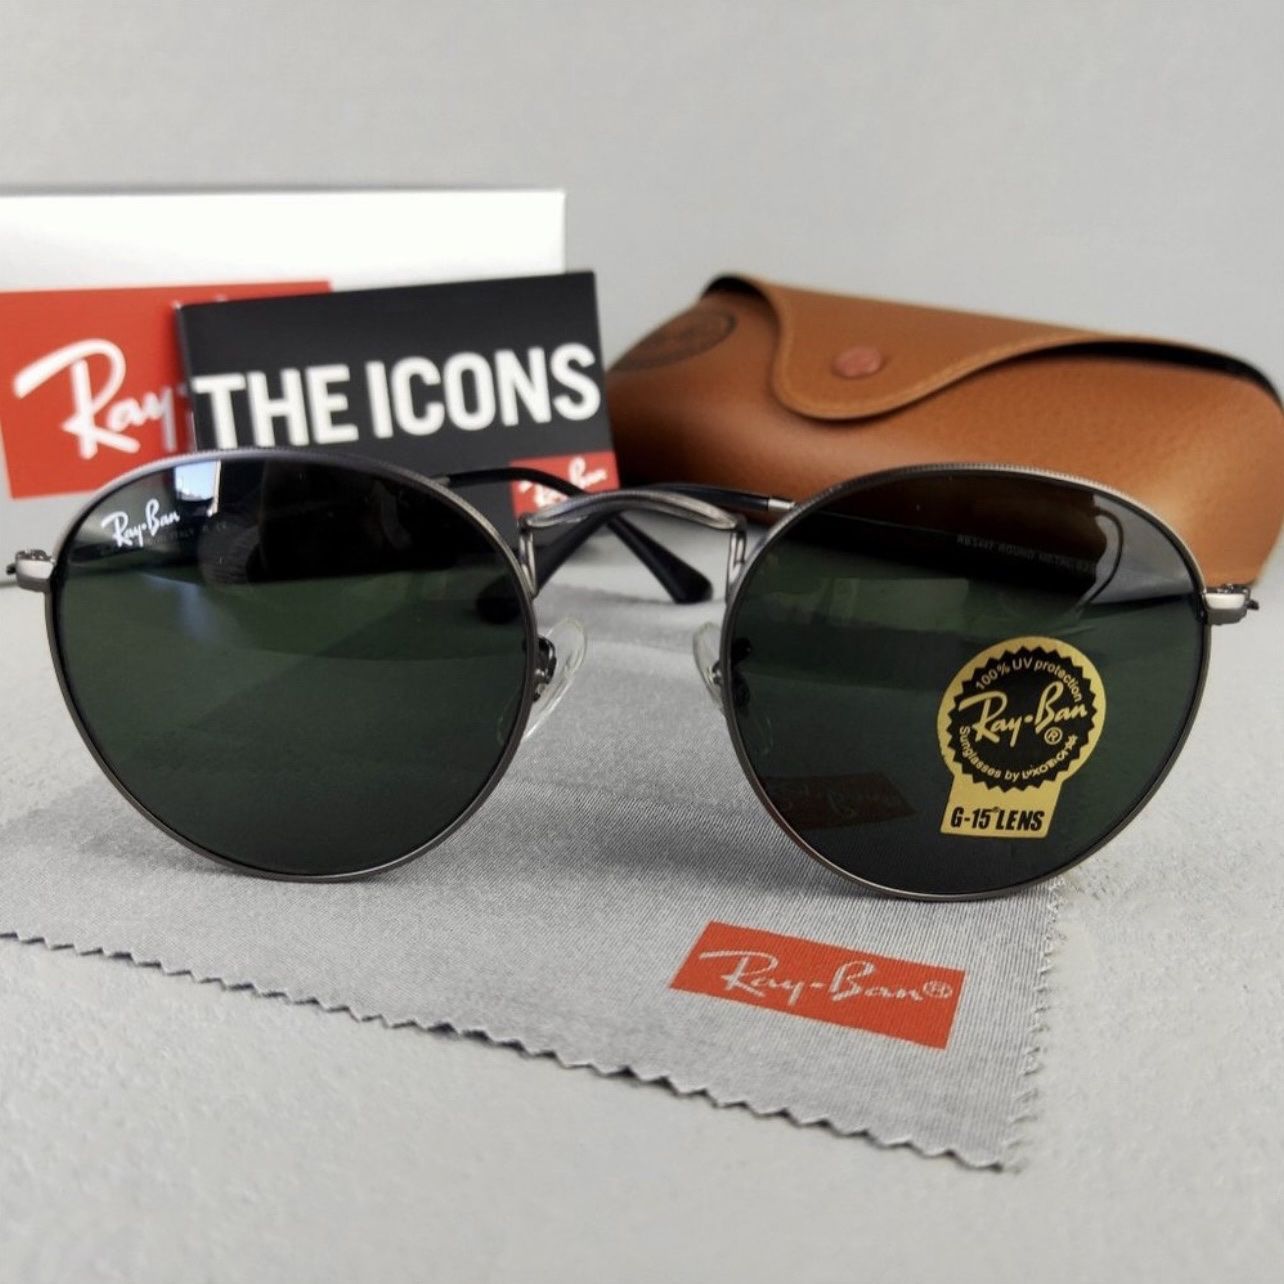 Ray Ban Black Classic real Glass lenses Round Metal Frame Unisex Standard size 50mm w/ Accessories Used